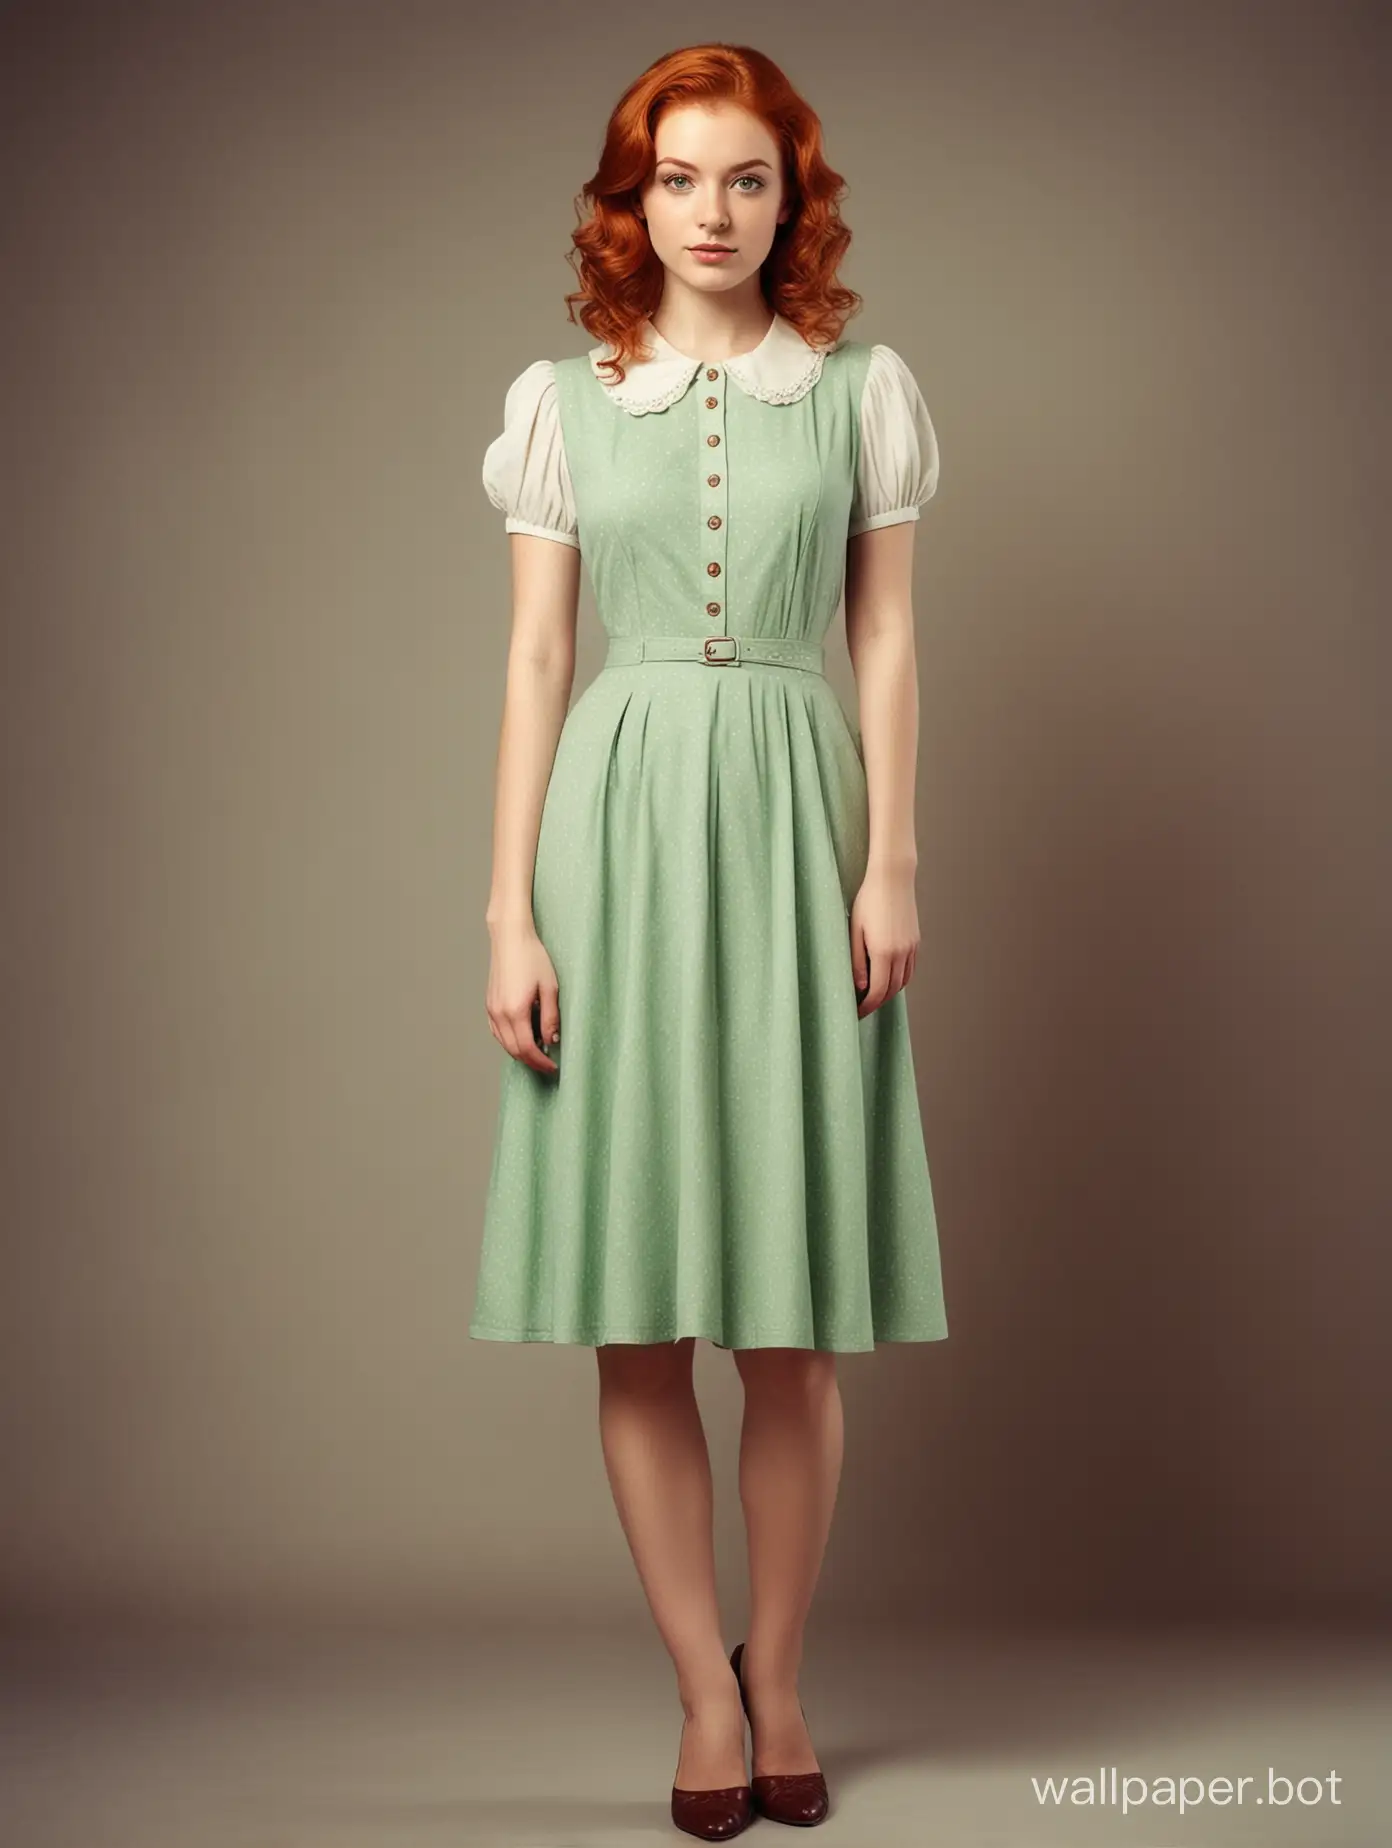 Vintage-Style-Portrait-of-a-Redheaded-Woman-with-Green-Eyes